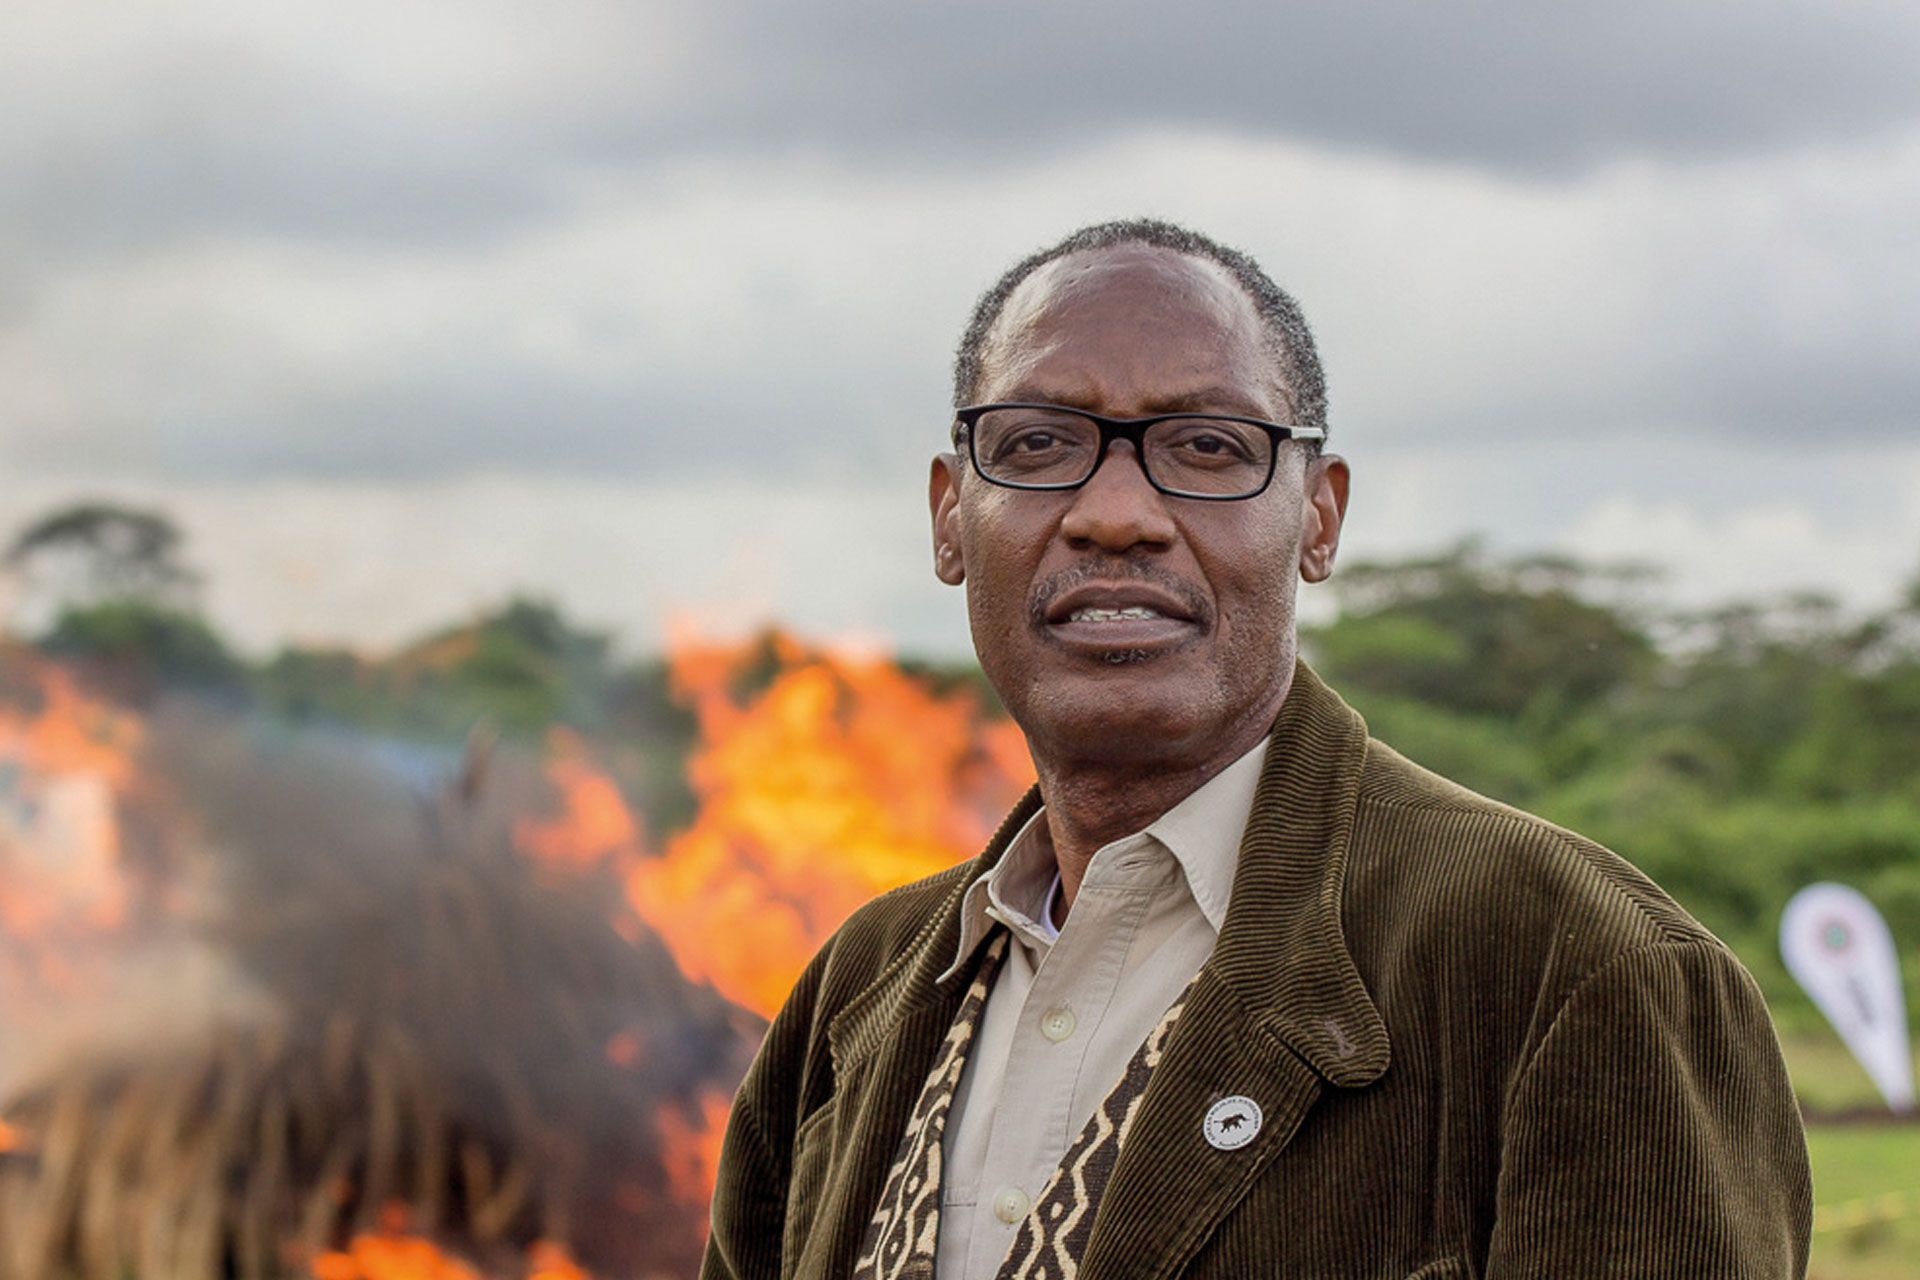 Kaddu Sebunya - CEO of the African Wildlife Foundation, activist for Africa and climate change